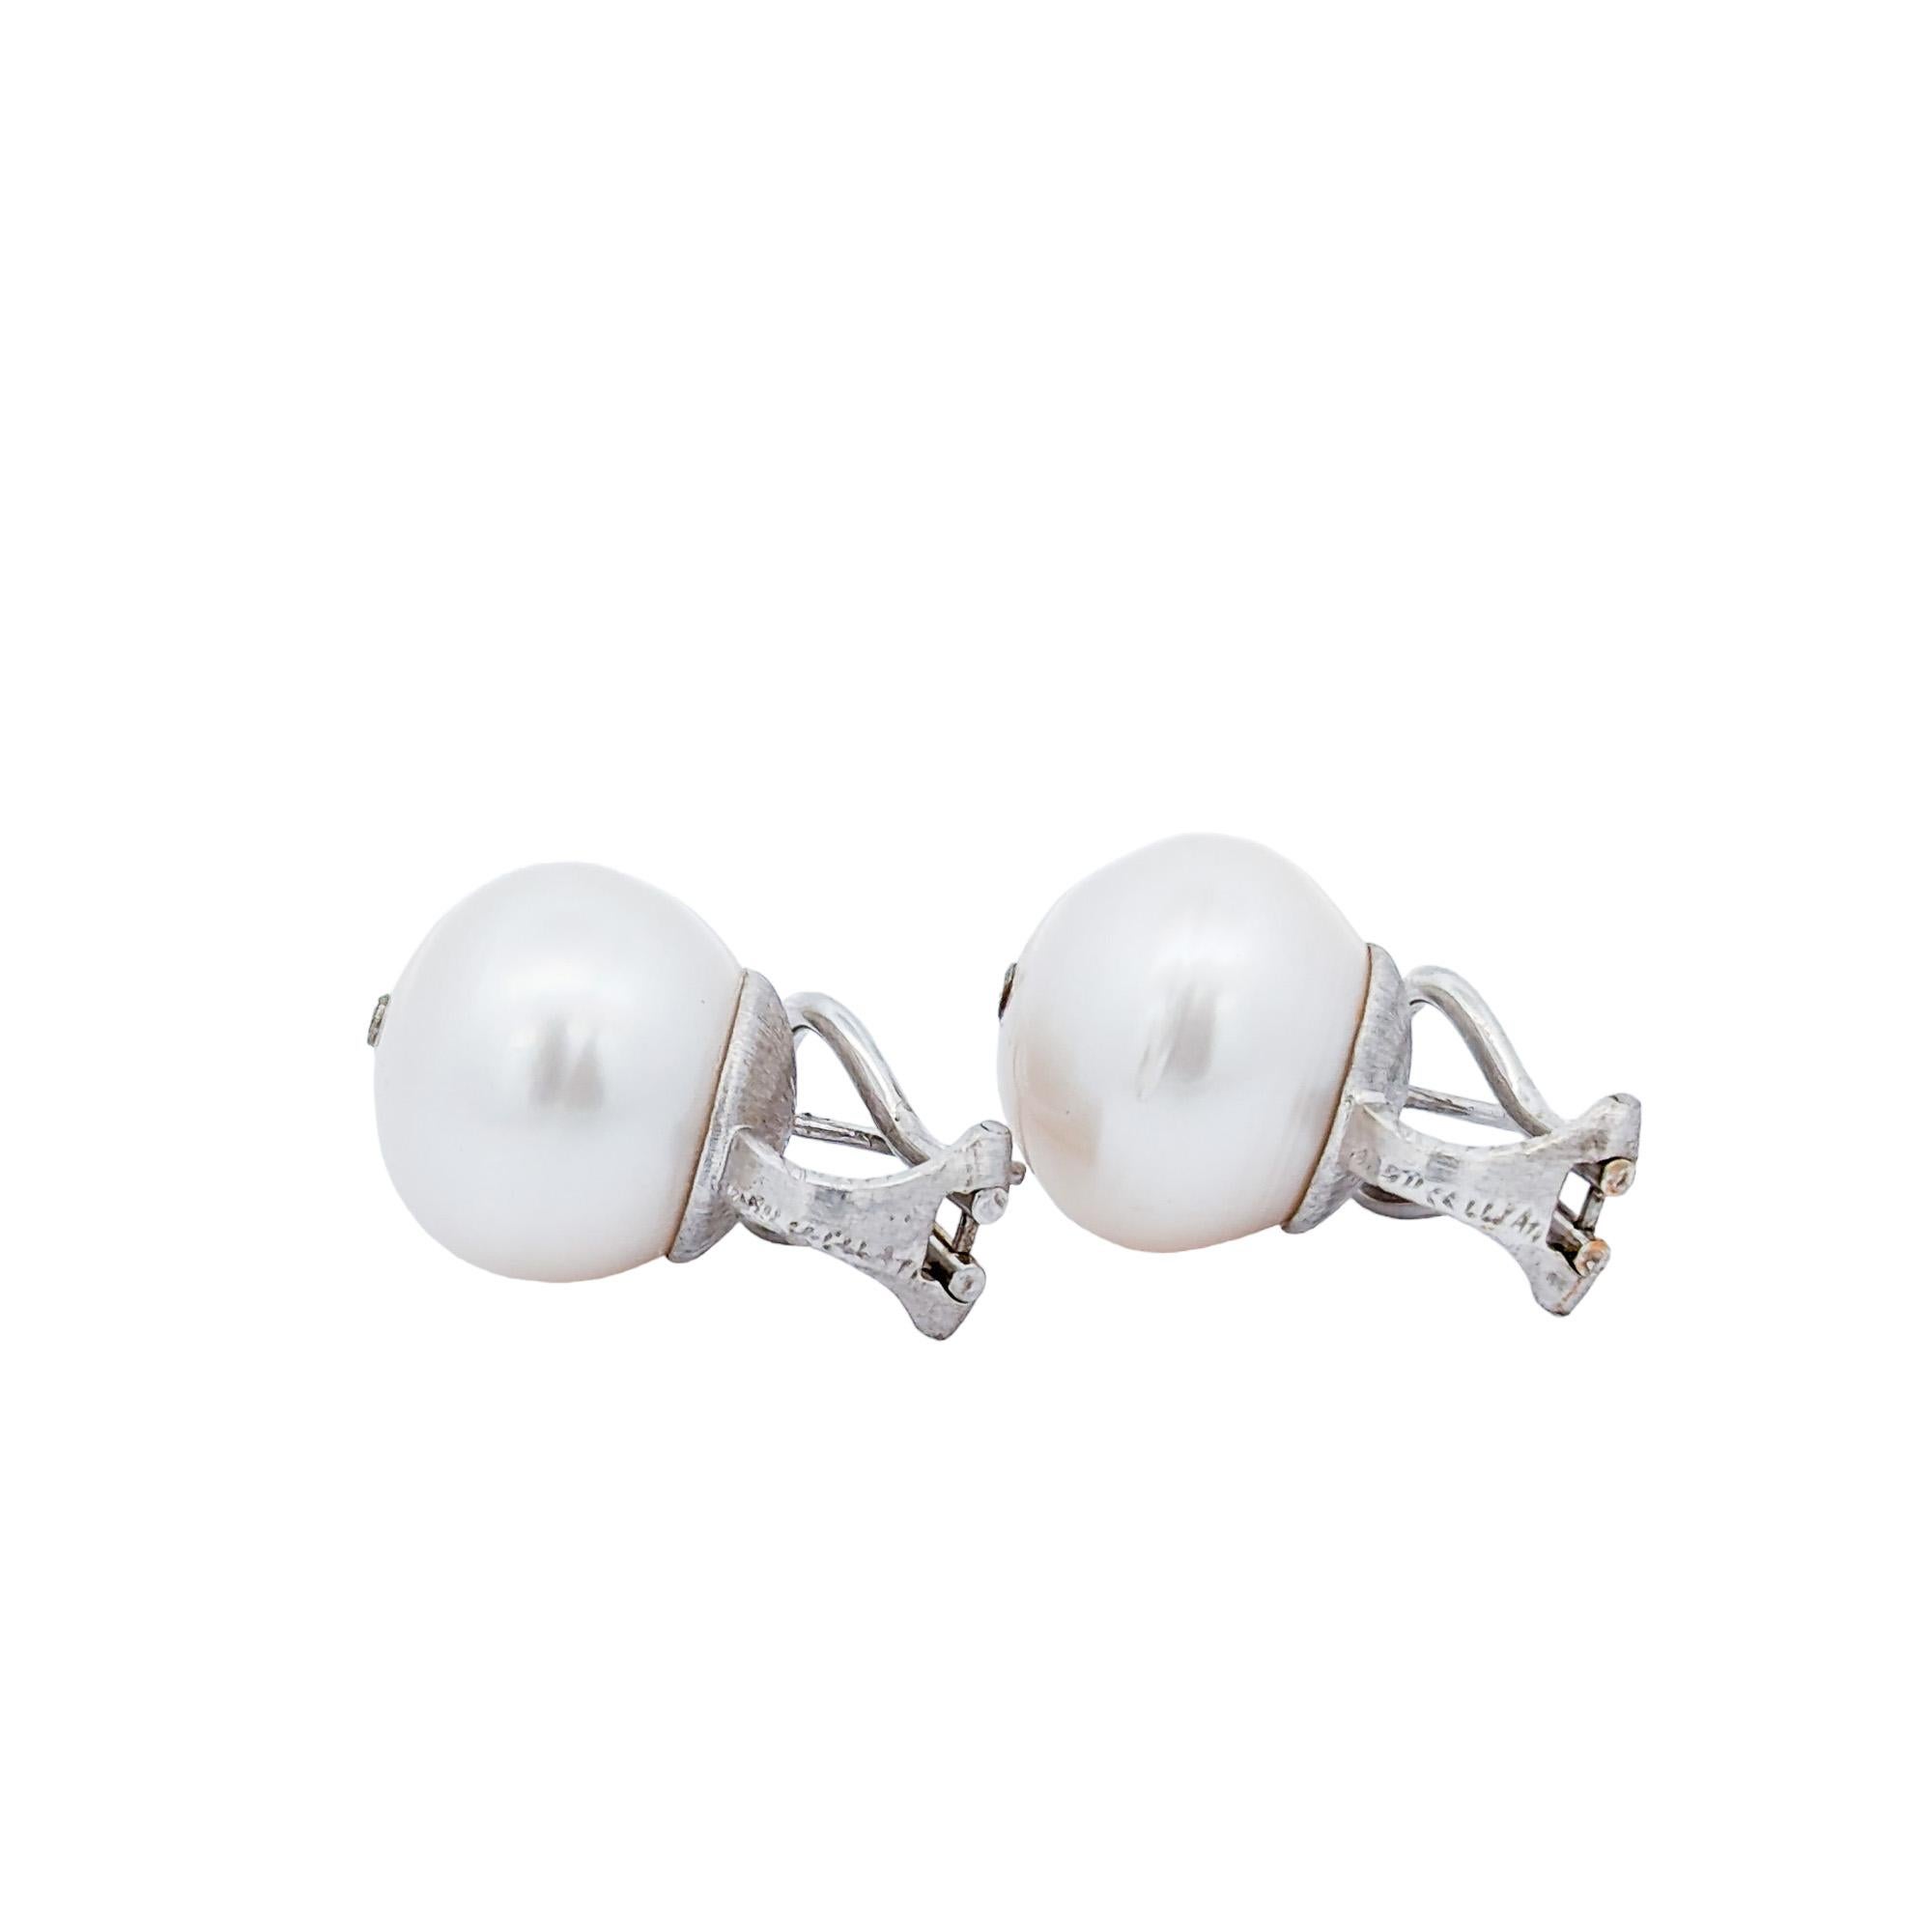 Maker: Mario Buccellati 

Period: Mid 20th Century

Metal: 18K White Gold

Pearls: Two (2) 14 mm cultured pearls 

Weight: 12.8 Grams

